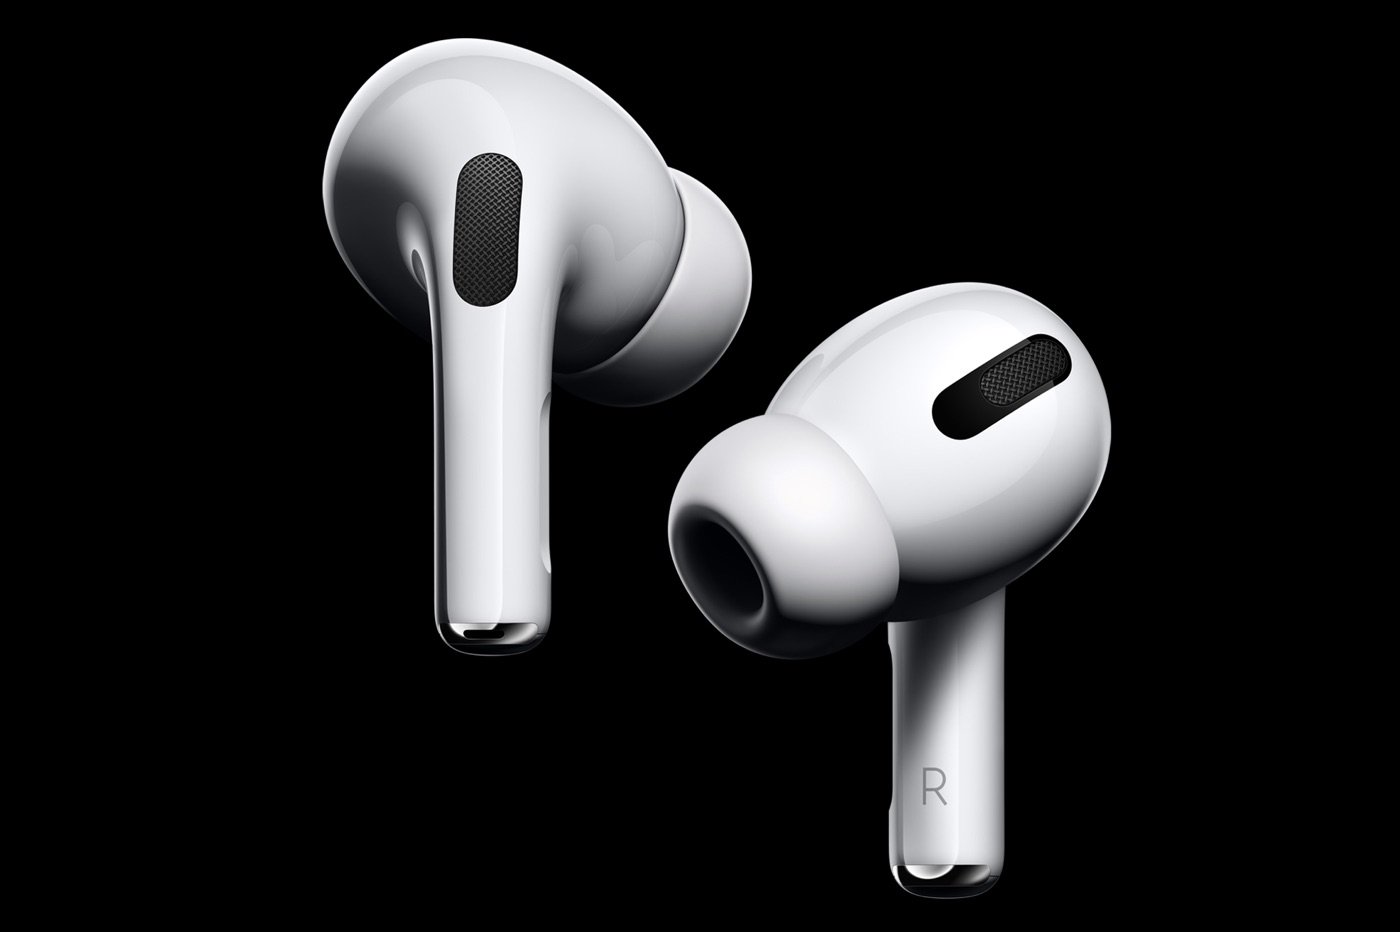 First Generation AirPods Pro